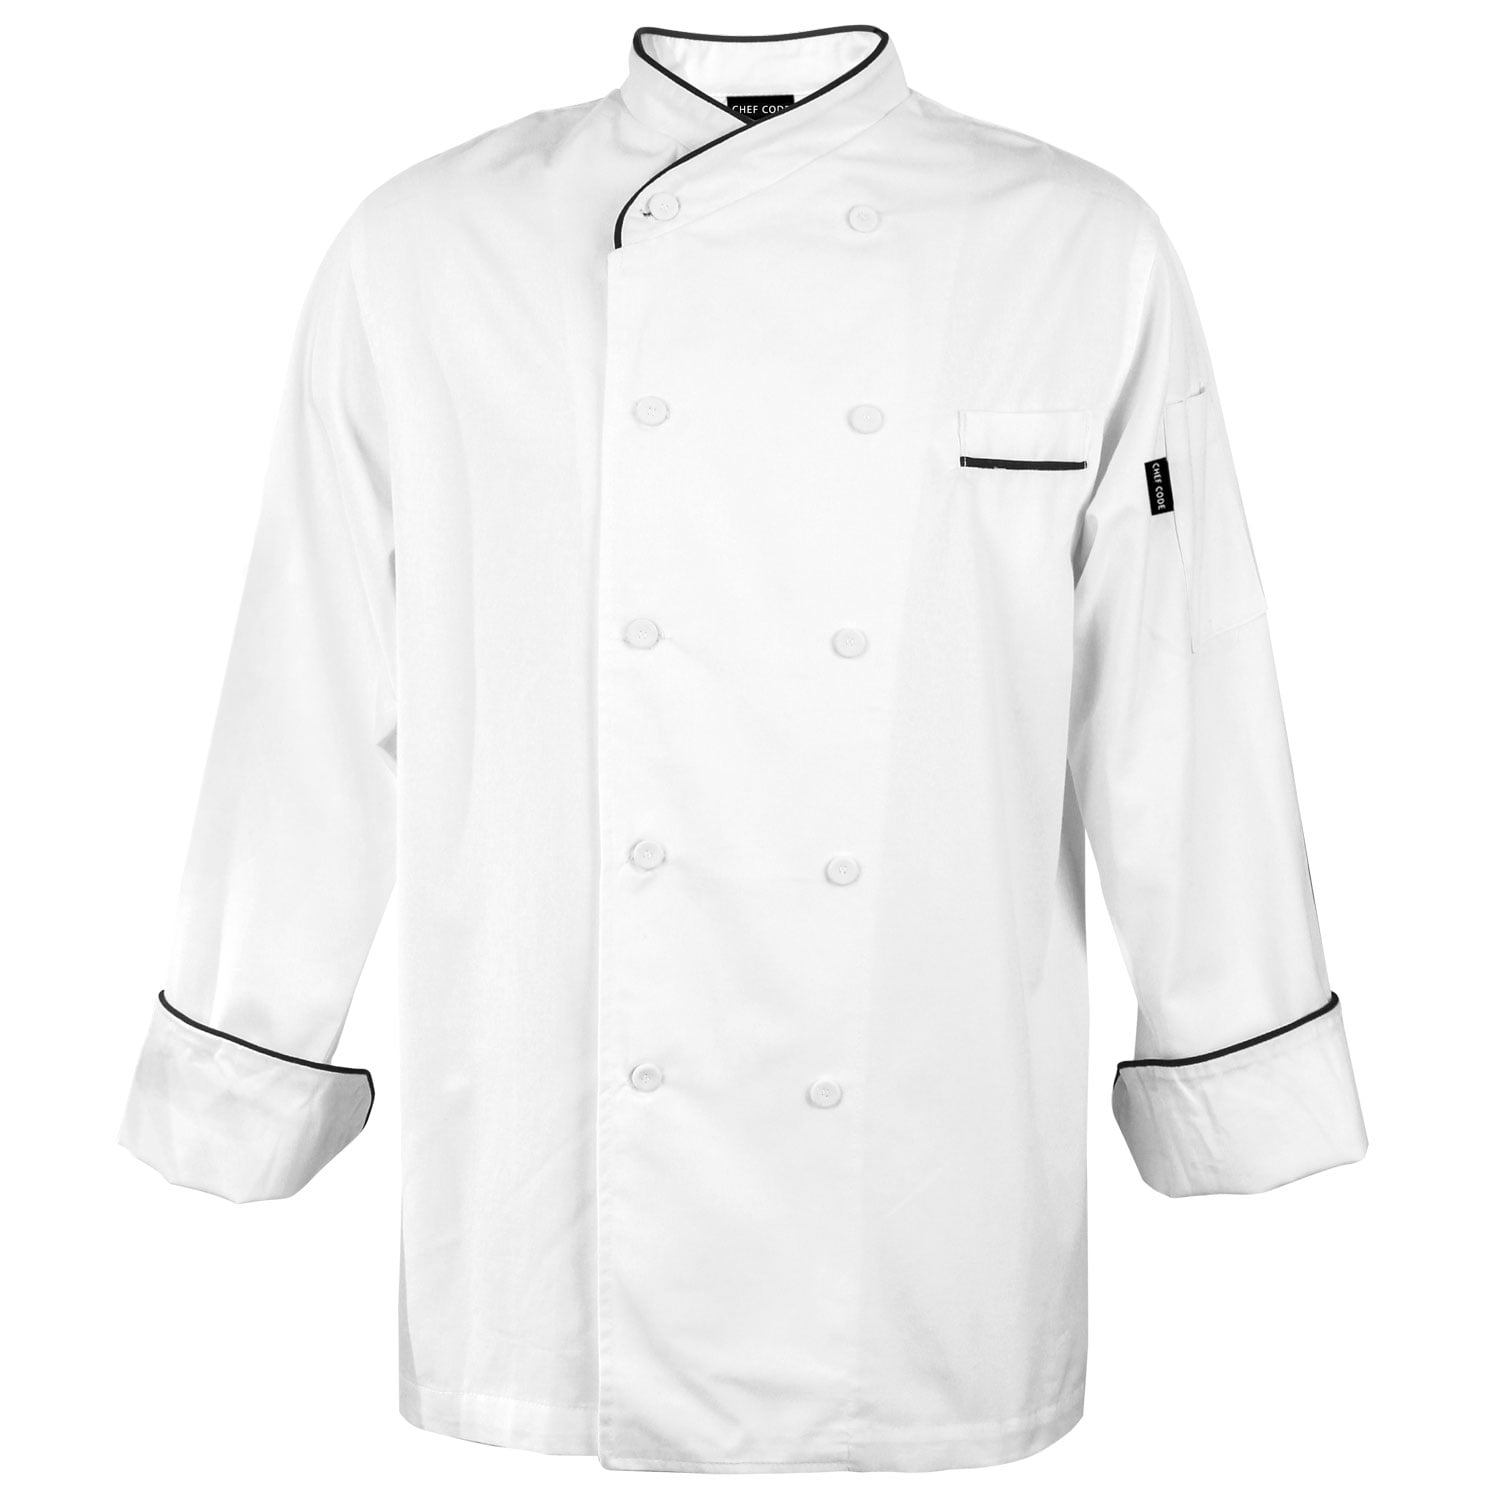 Leorenzo Produced ND-06 Mens Black Chef Jacket Multi Colour in Strip Chef Coat 